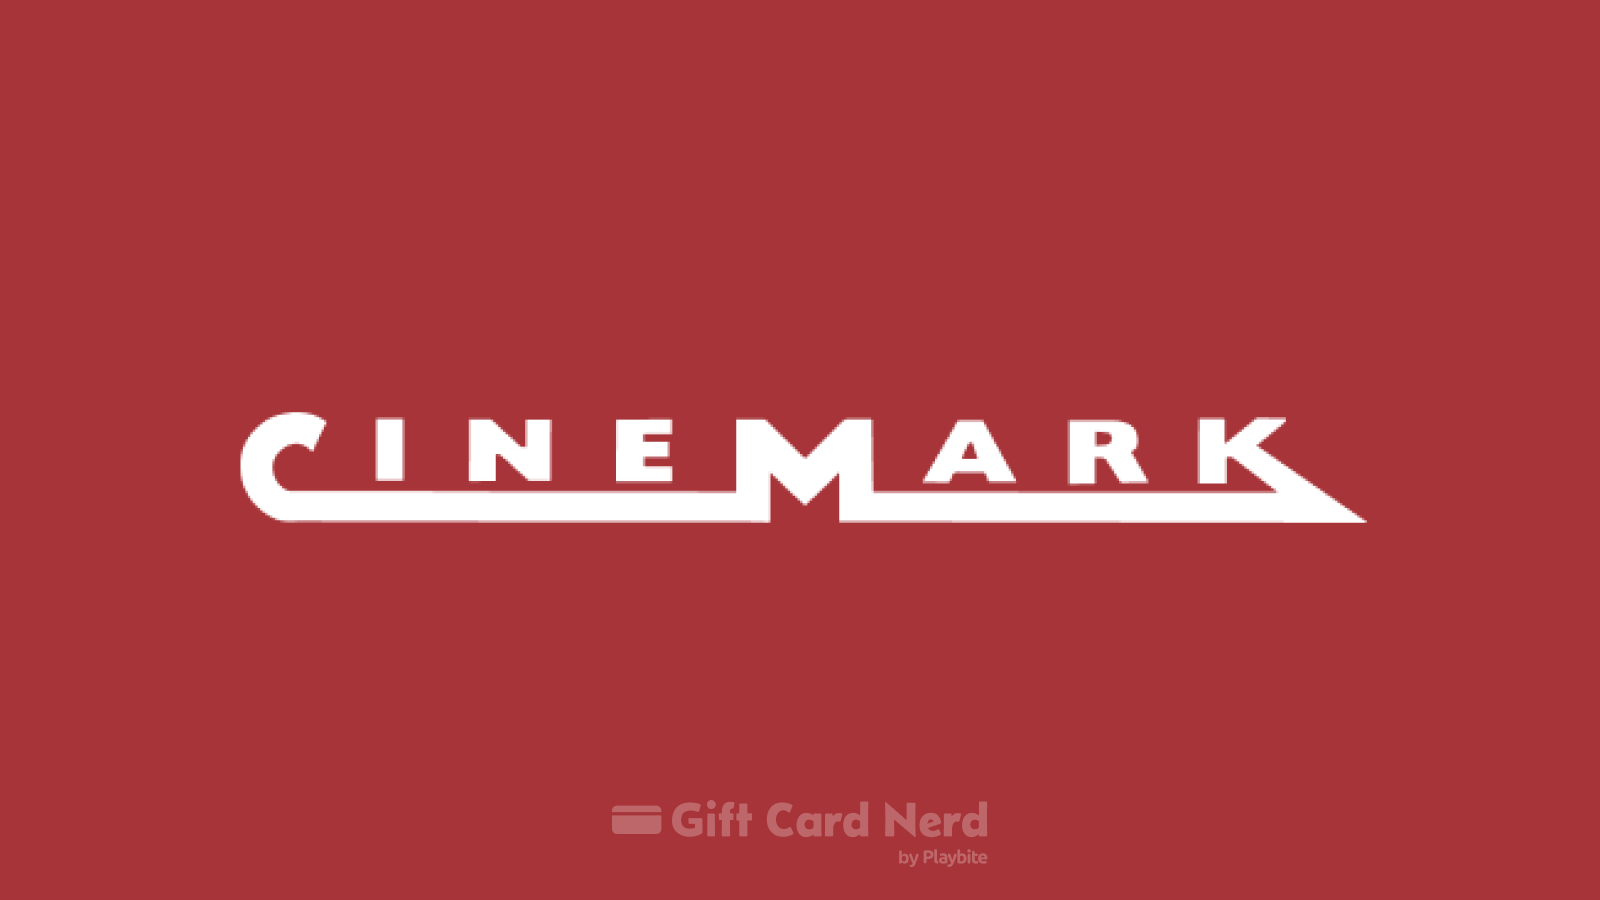 Can I Use a Cinemark Gift Card on Google Play Store?